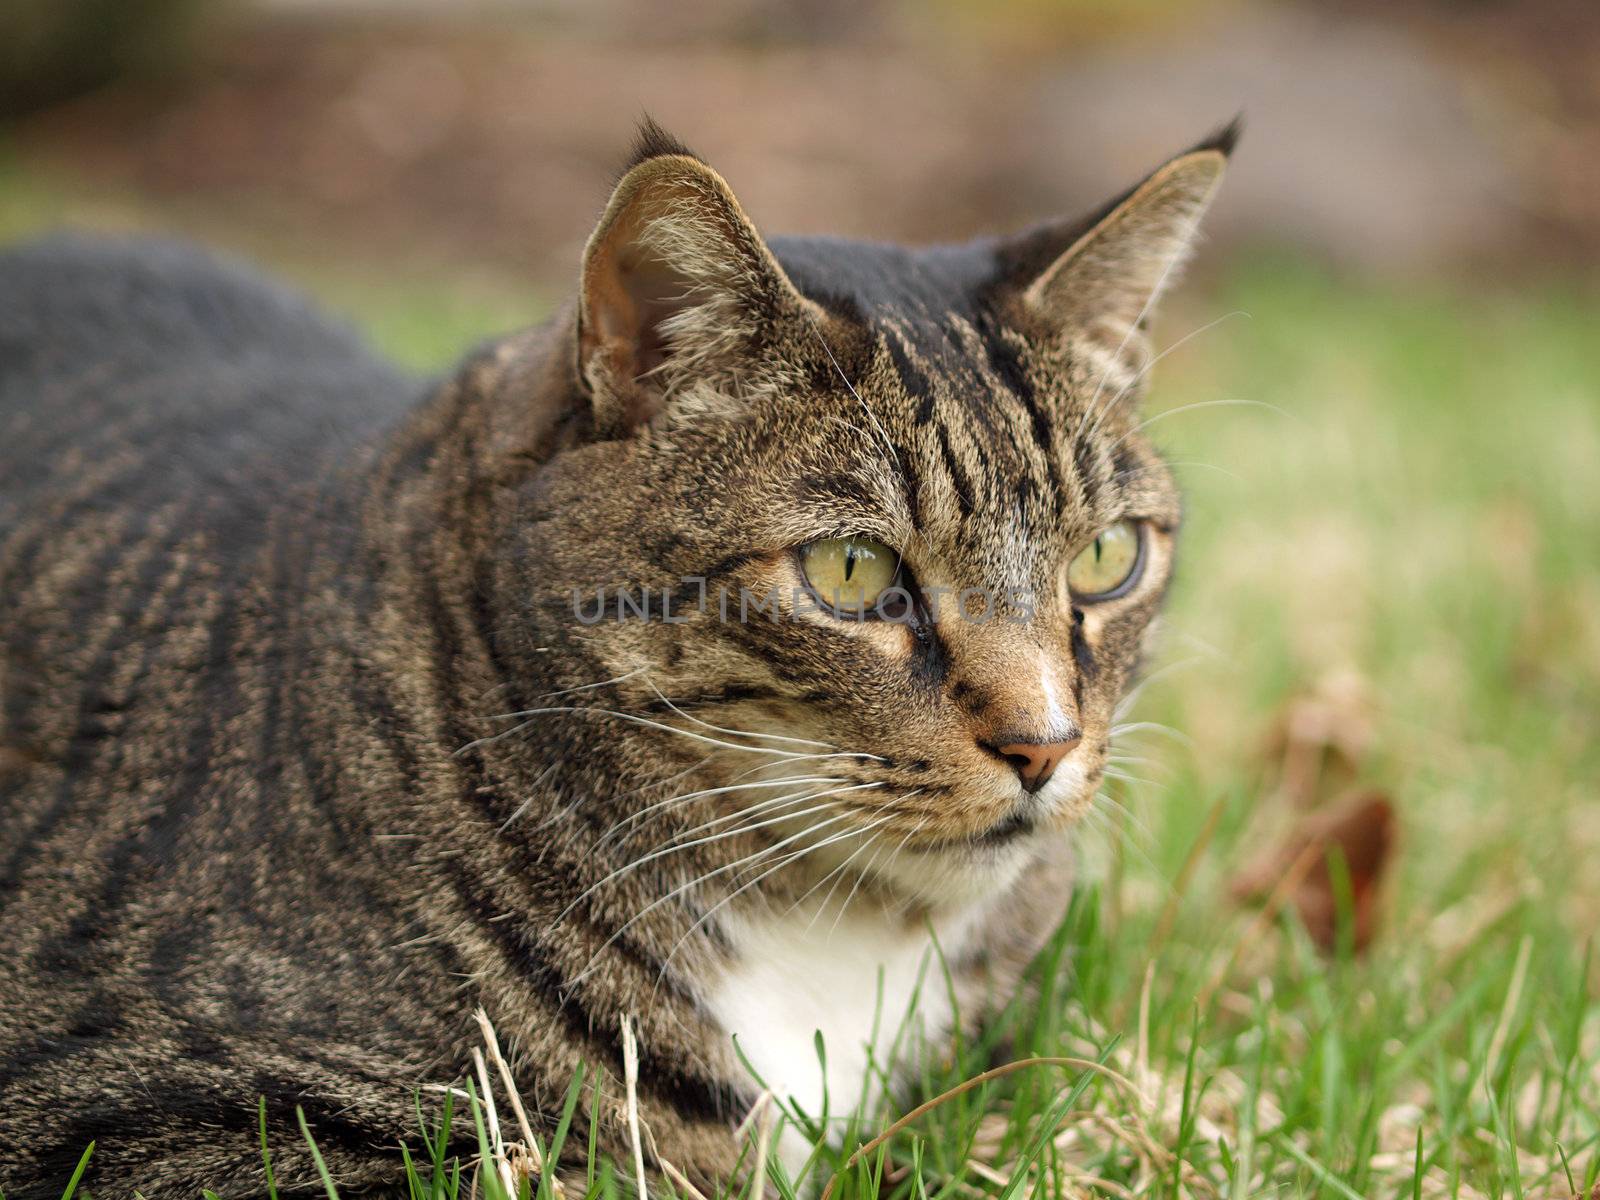 An Adult Tabby Cat Outdoors in a Grassy Yard 